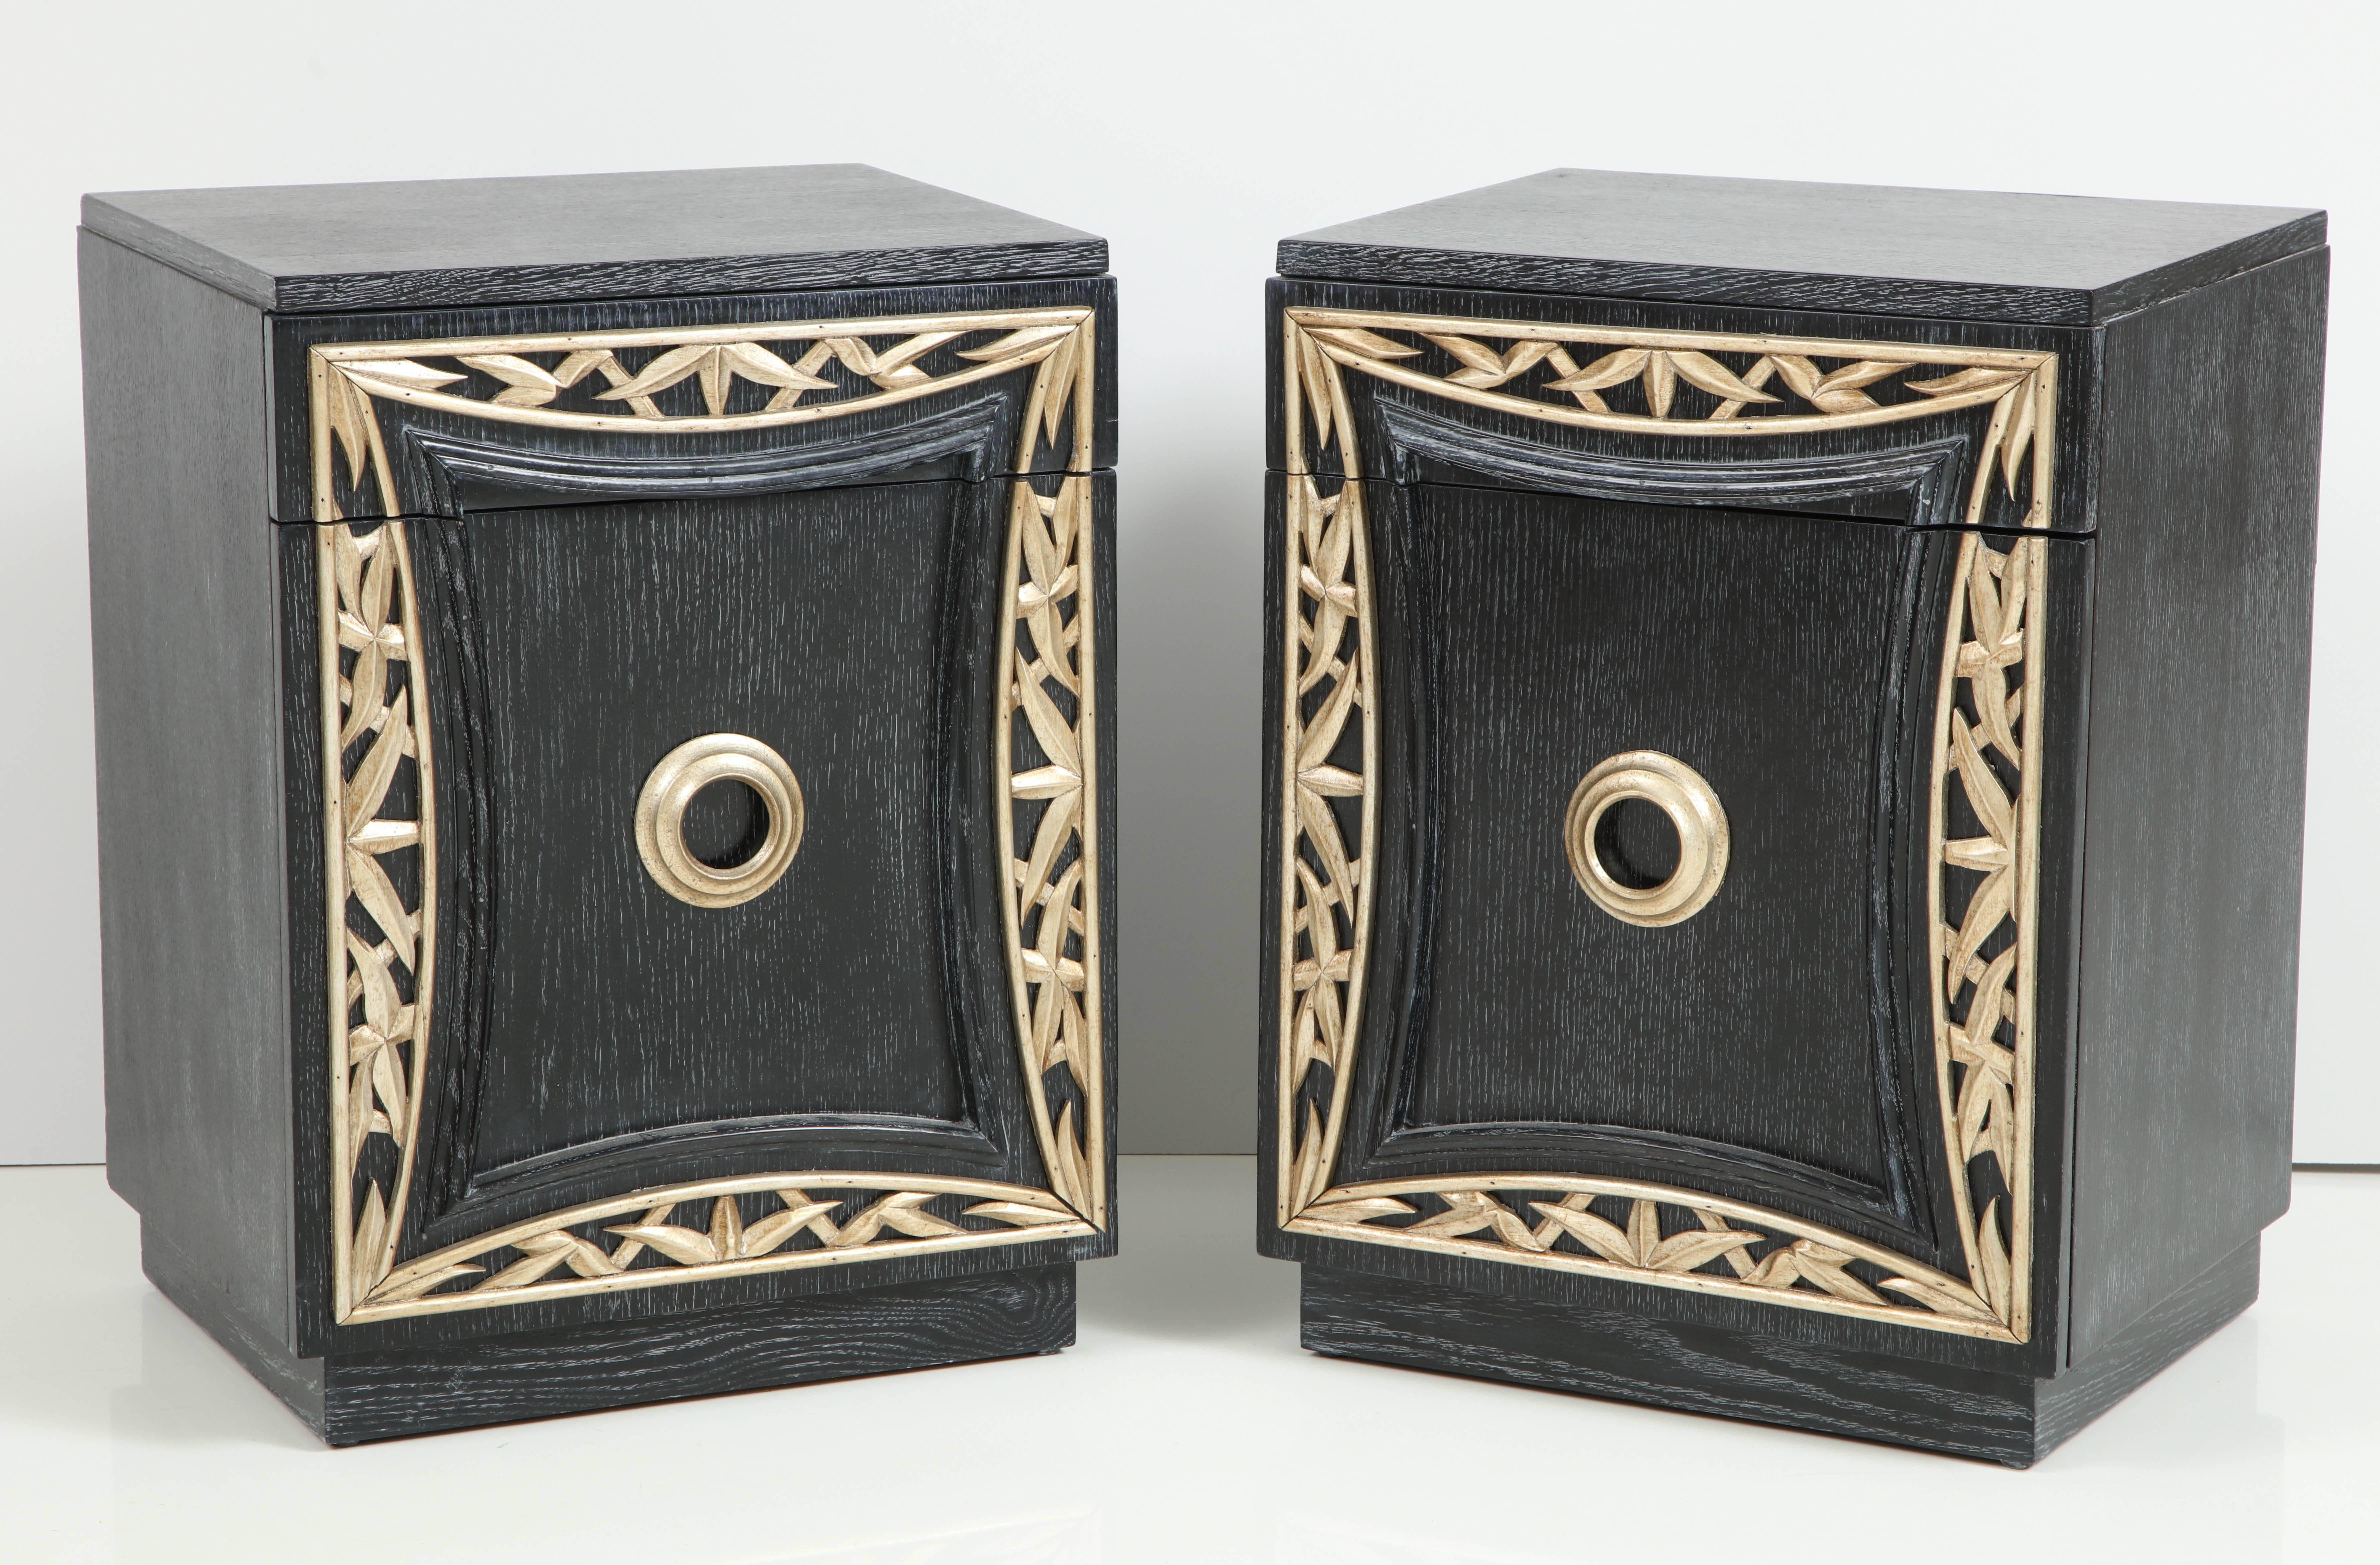 Elegant pair of end cabinets / nightstands by James Mont.
The cabinets have been beautifully refinished in a dark blue / black cerused oak finish which is enhanced by a decorative carved bamboo fret work in a glazed silver leaf.